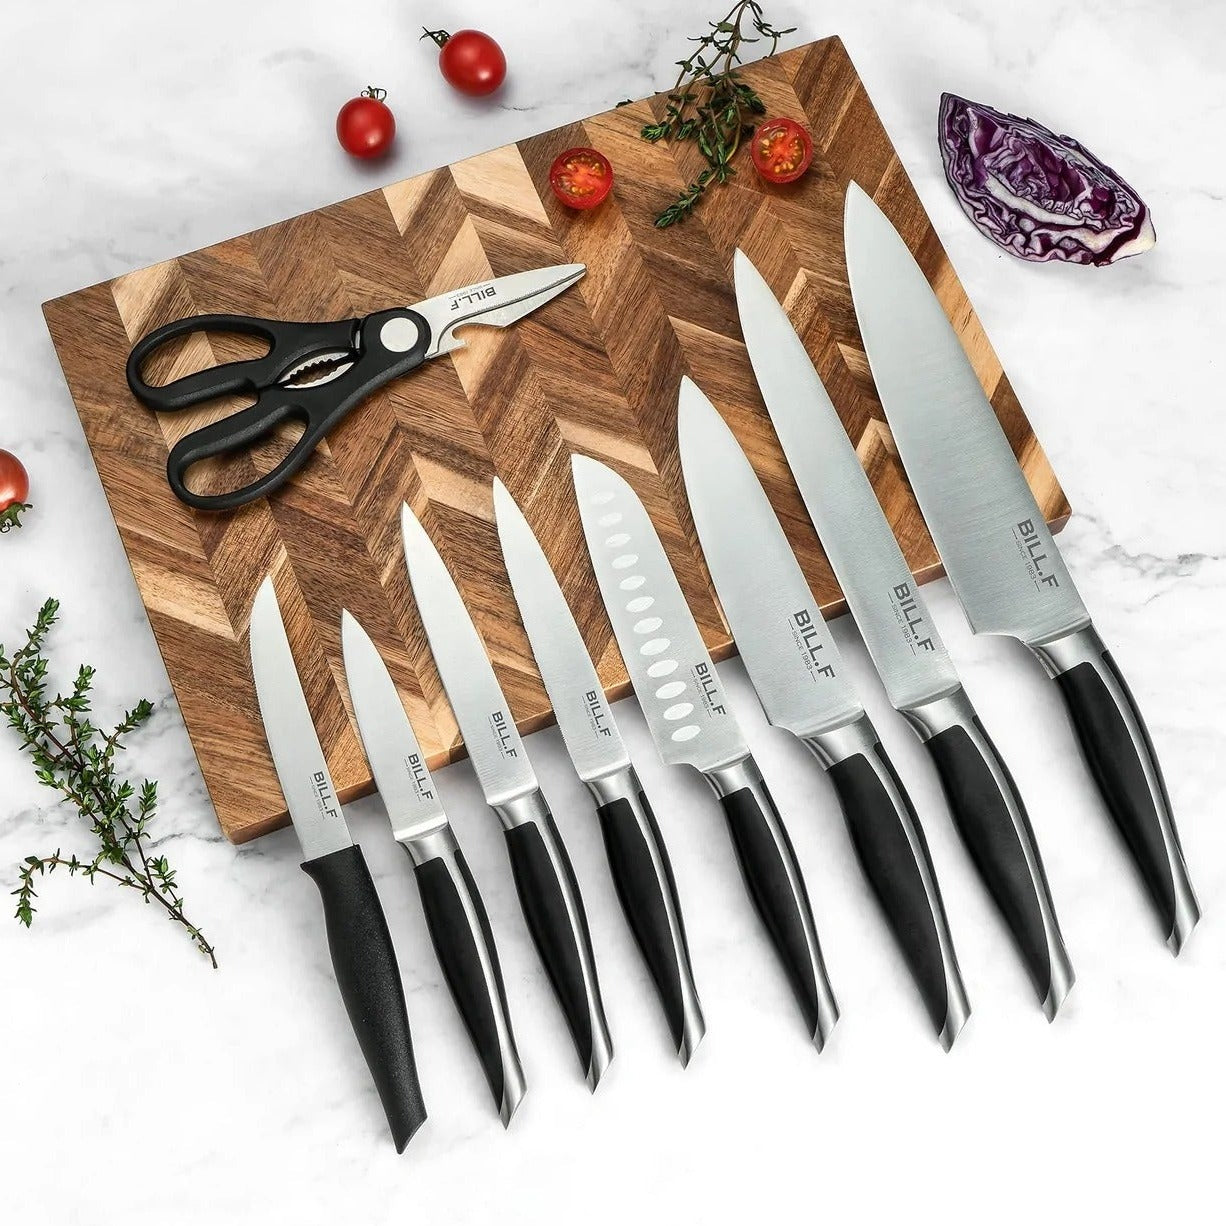 Aiheal Knife Set,17 Pieces Stainless Steel Kitchen Knife Set with Clea